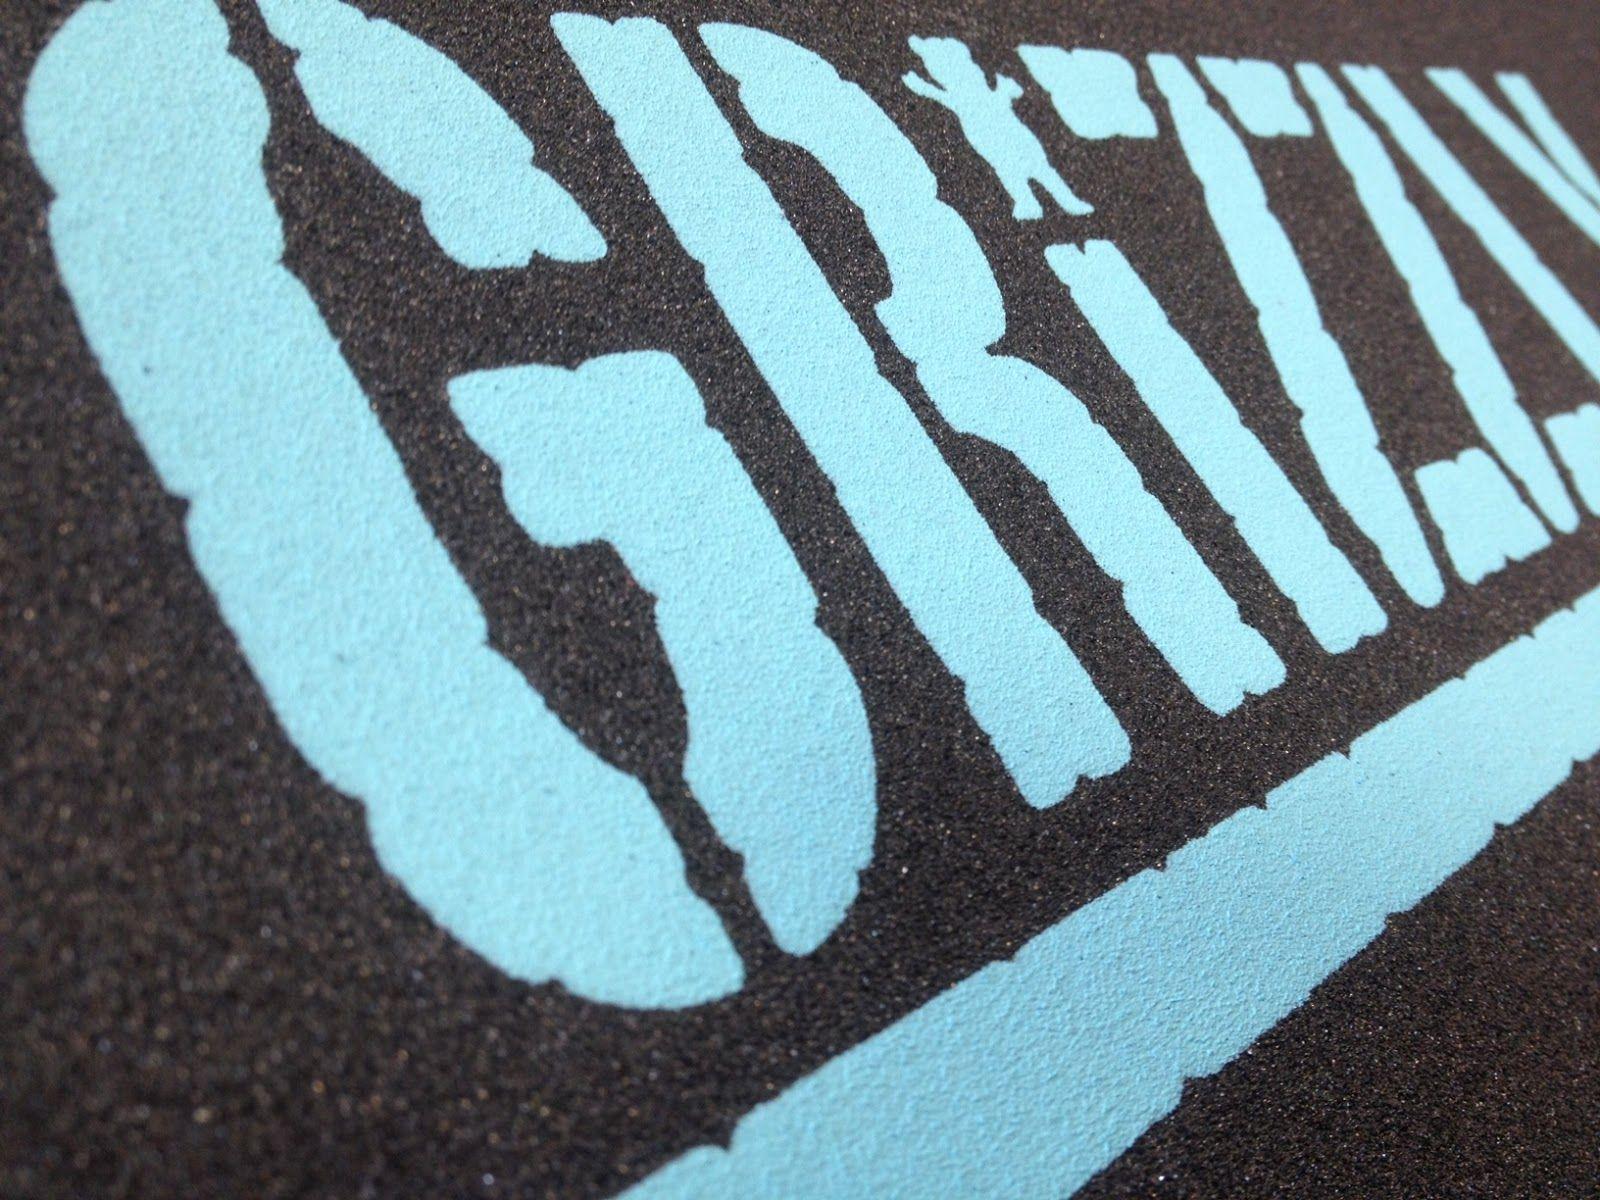 Download Grizzly Griptape Wallpaper Gallery